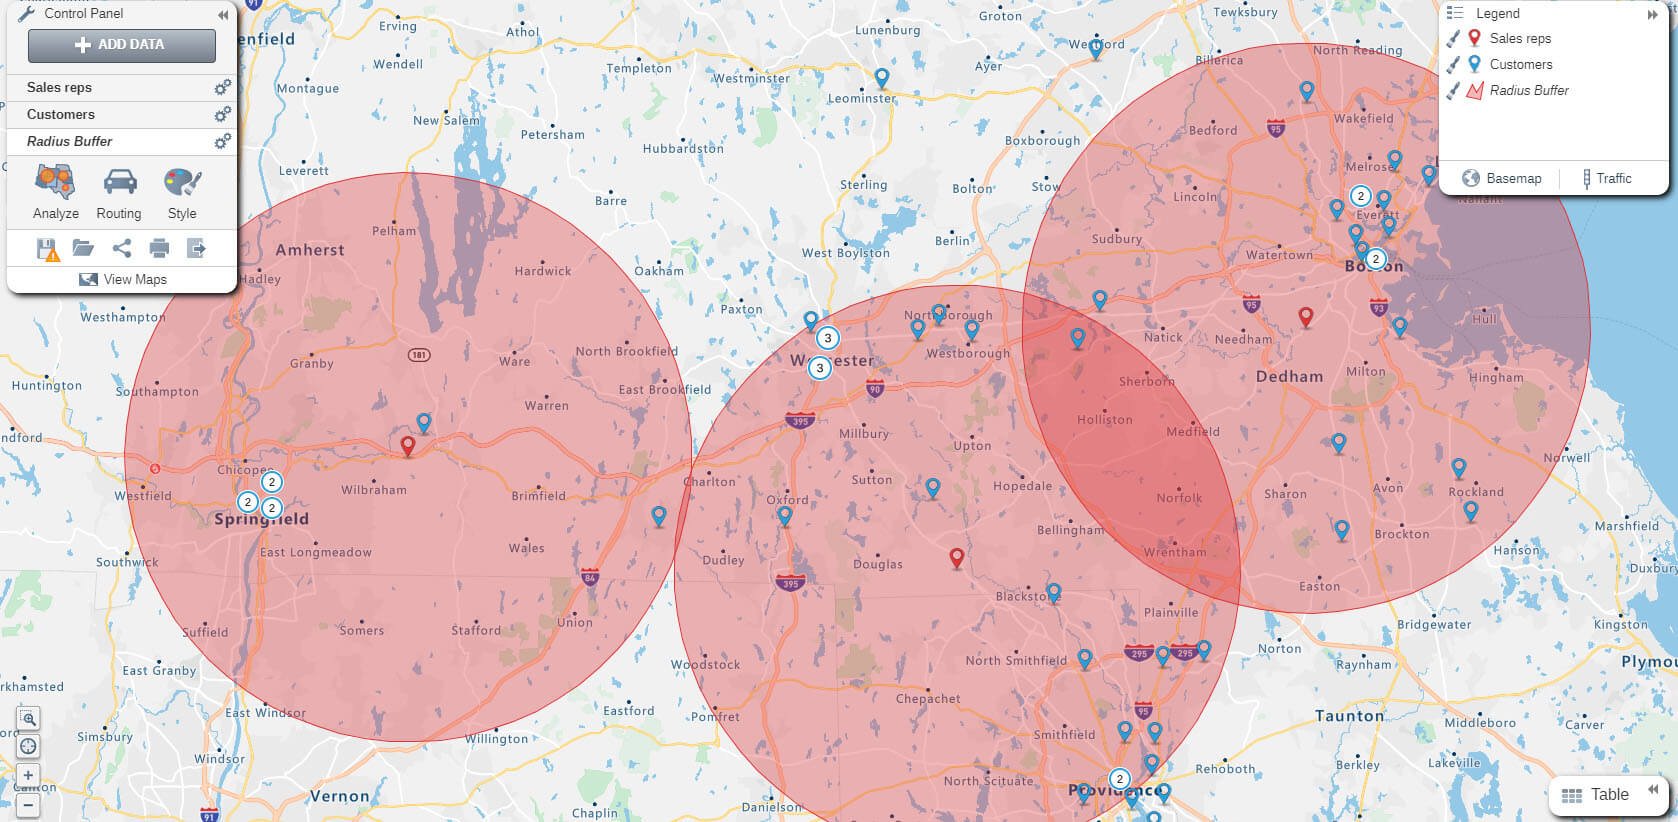 Additional sales rep added to radius map